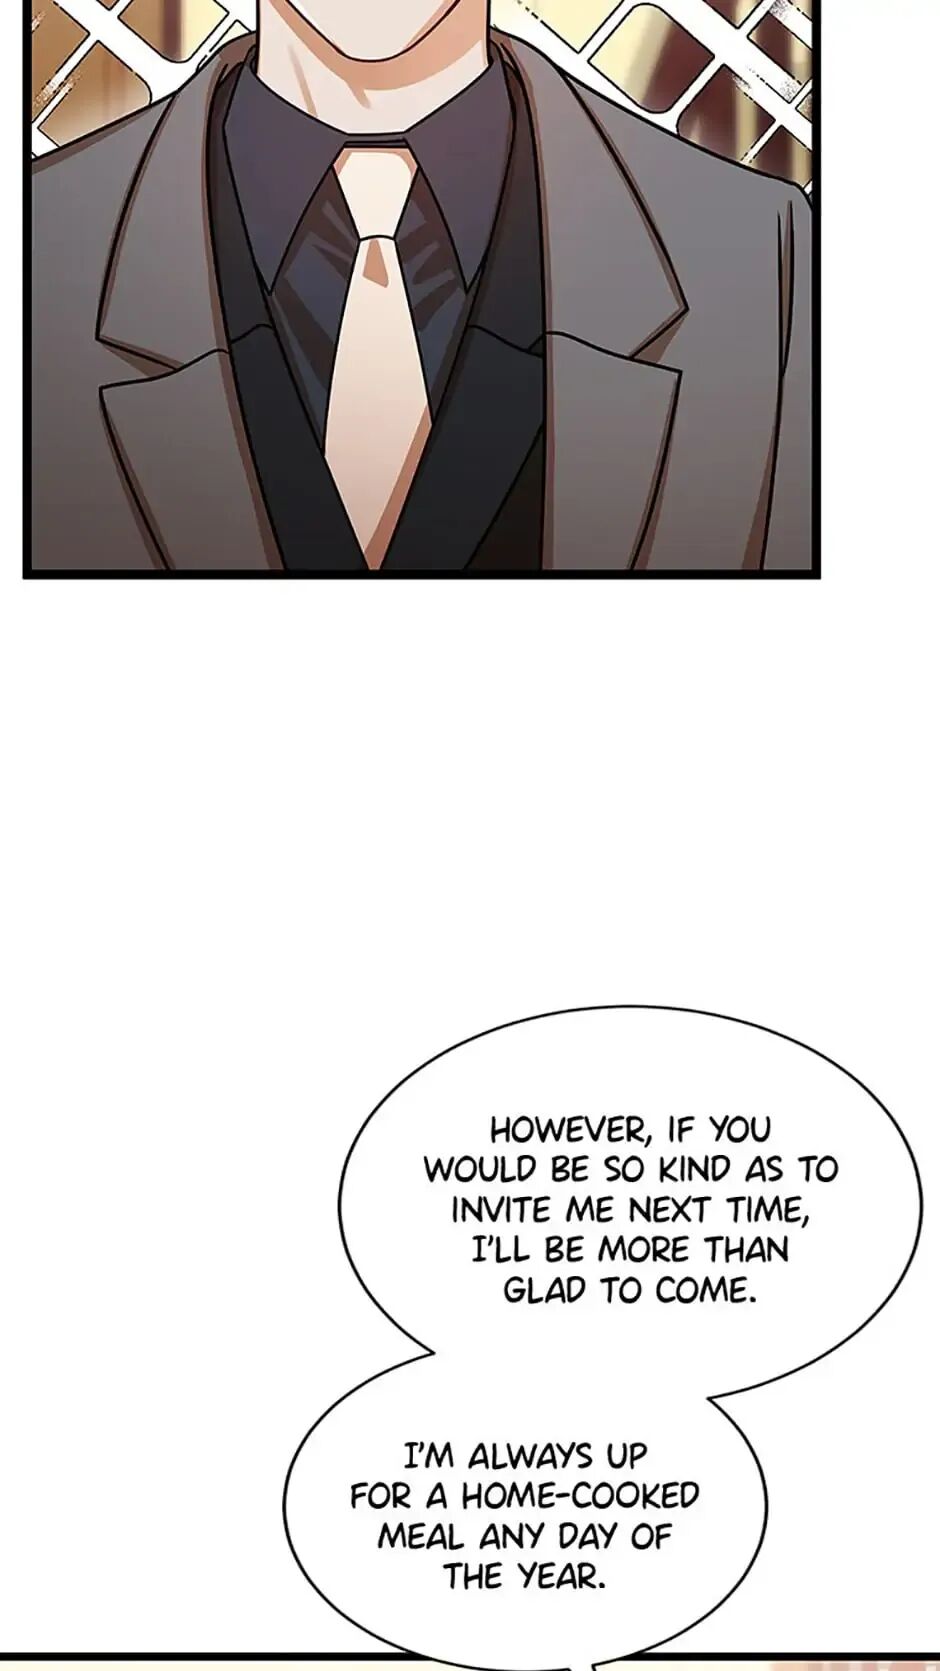 I Confessed to the Boss Chapter 29 - HolyManga.net